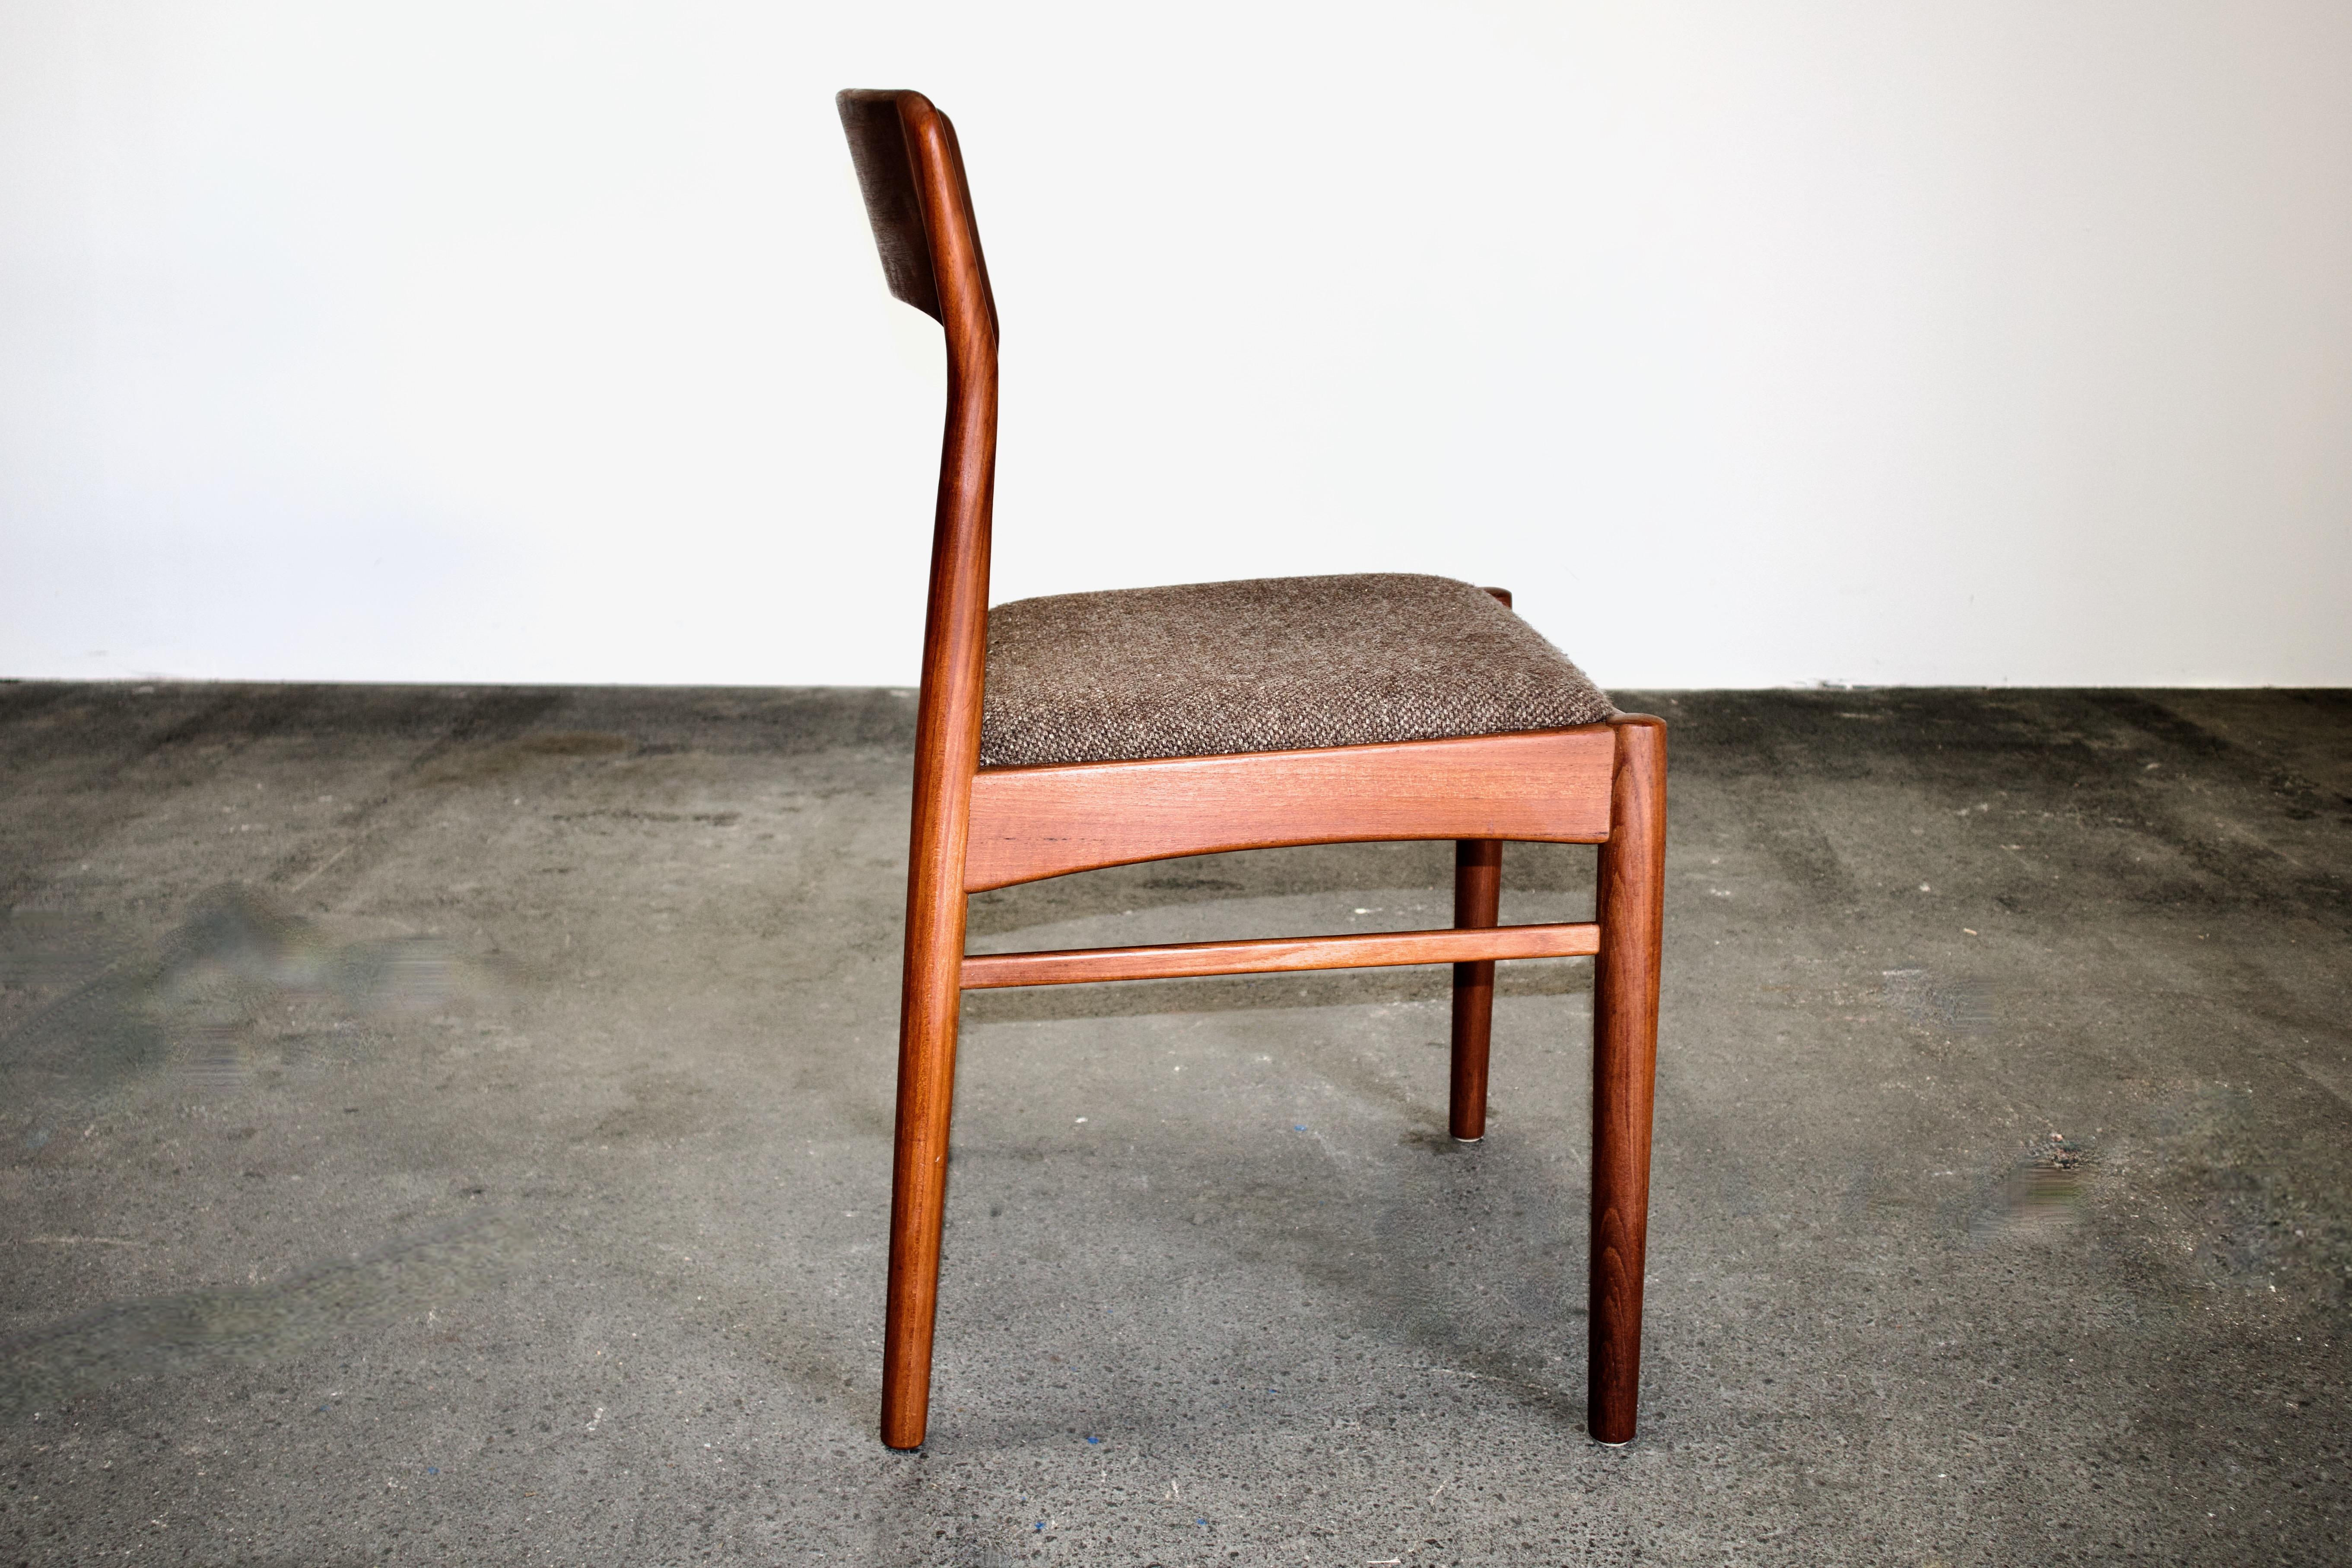 Quirky 1960s Danish Teak Chairs By Kai Kristiansen for K.S. Mobler In Good Condition For Sale In Grand Cayman, KY